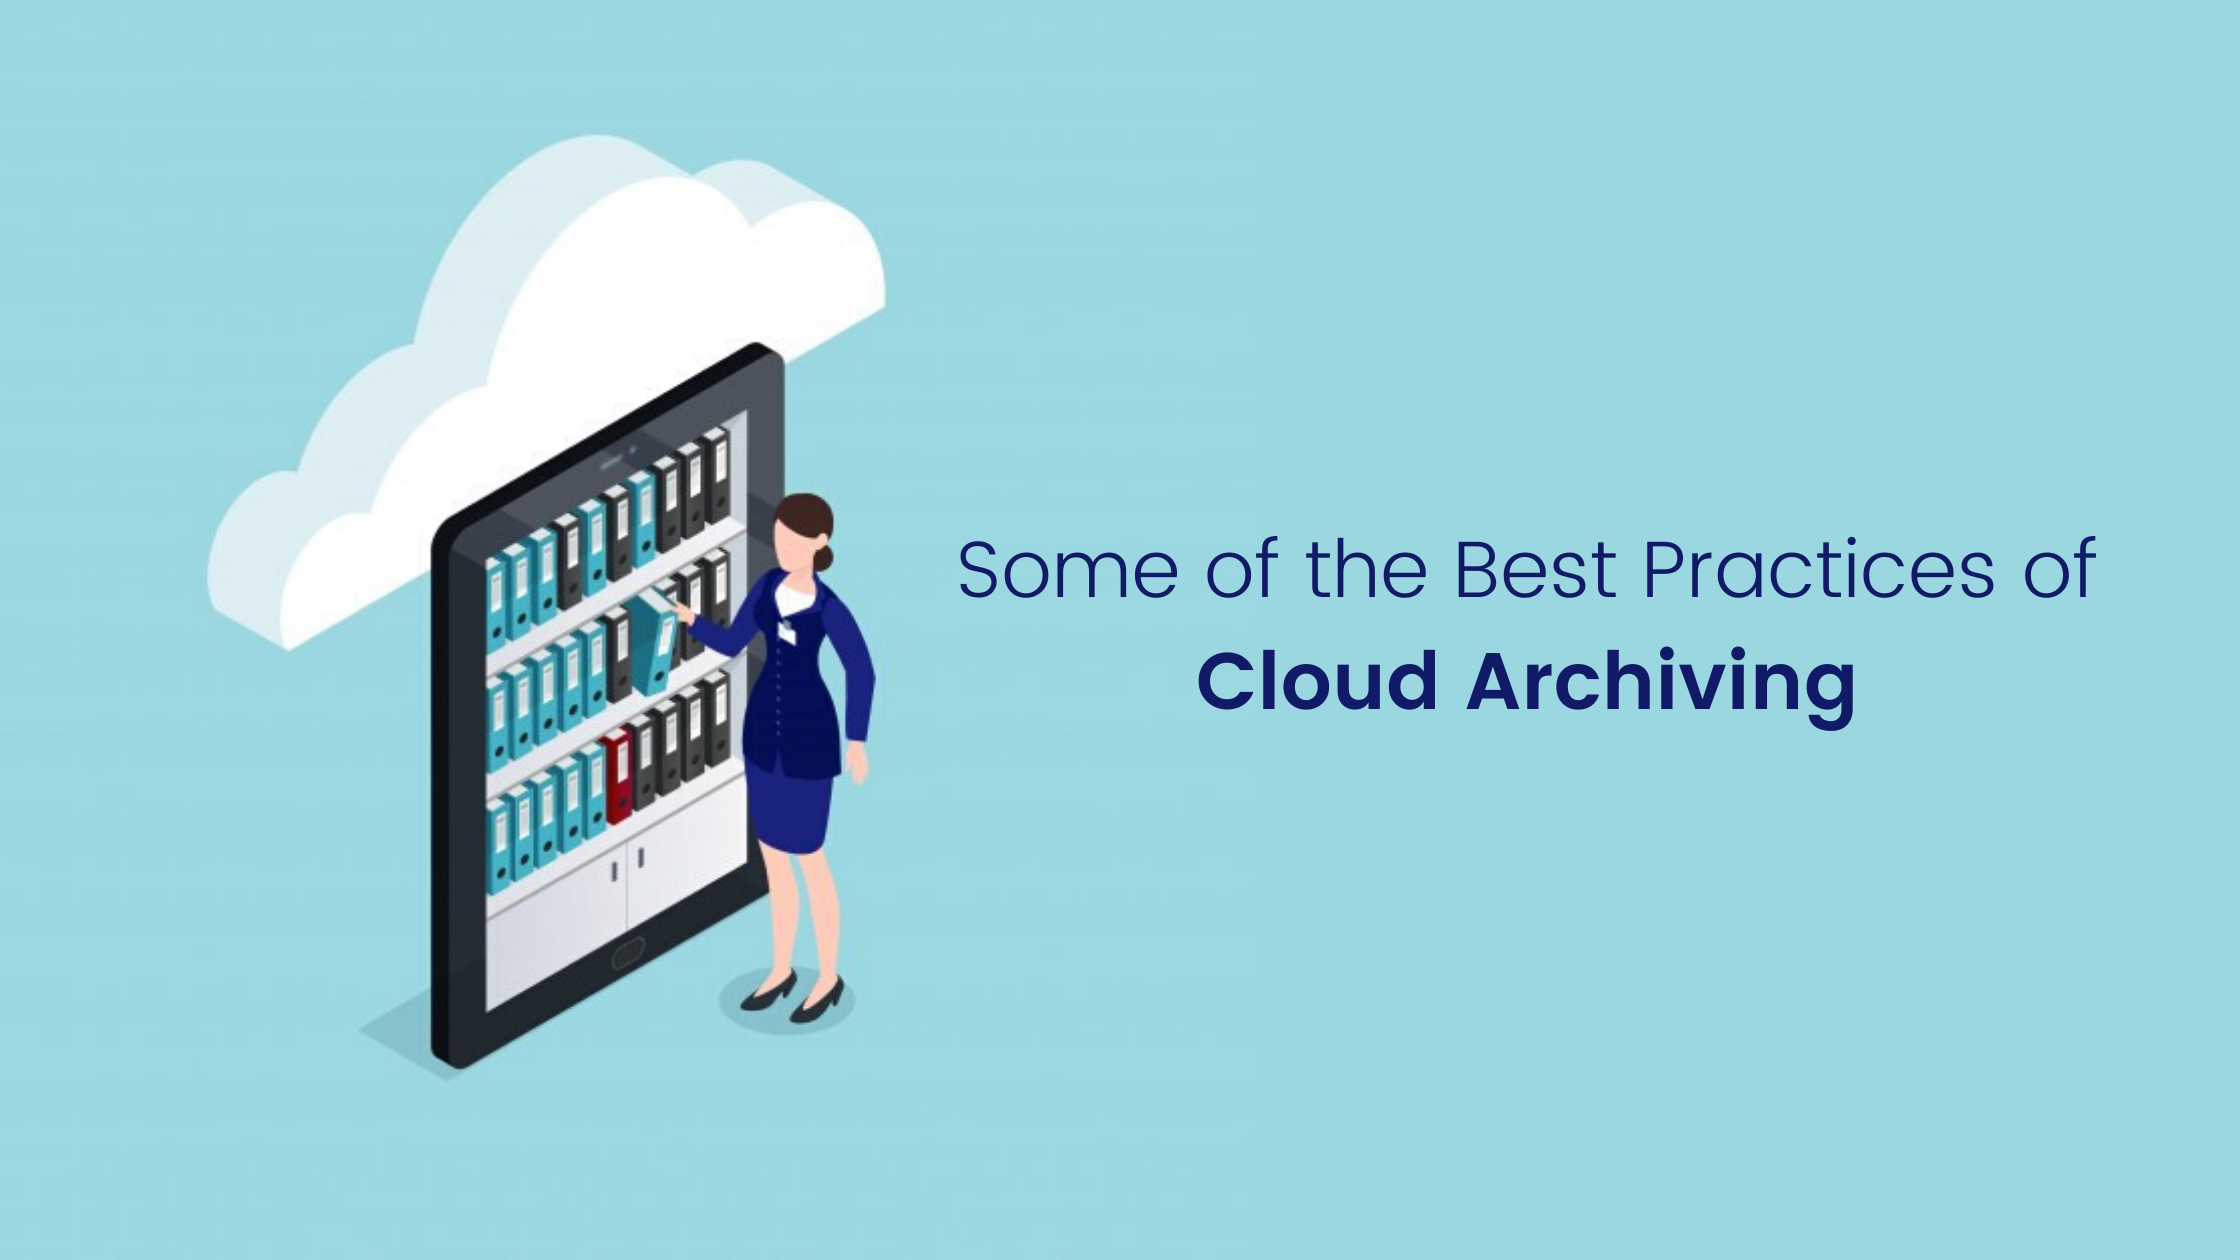 Some of the Best Practices of Cloud Archiving